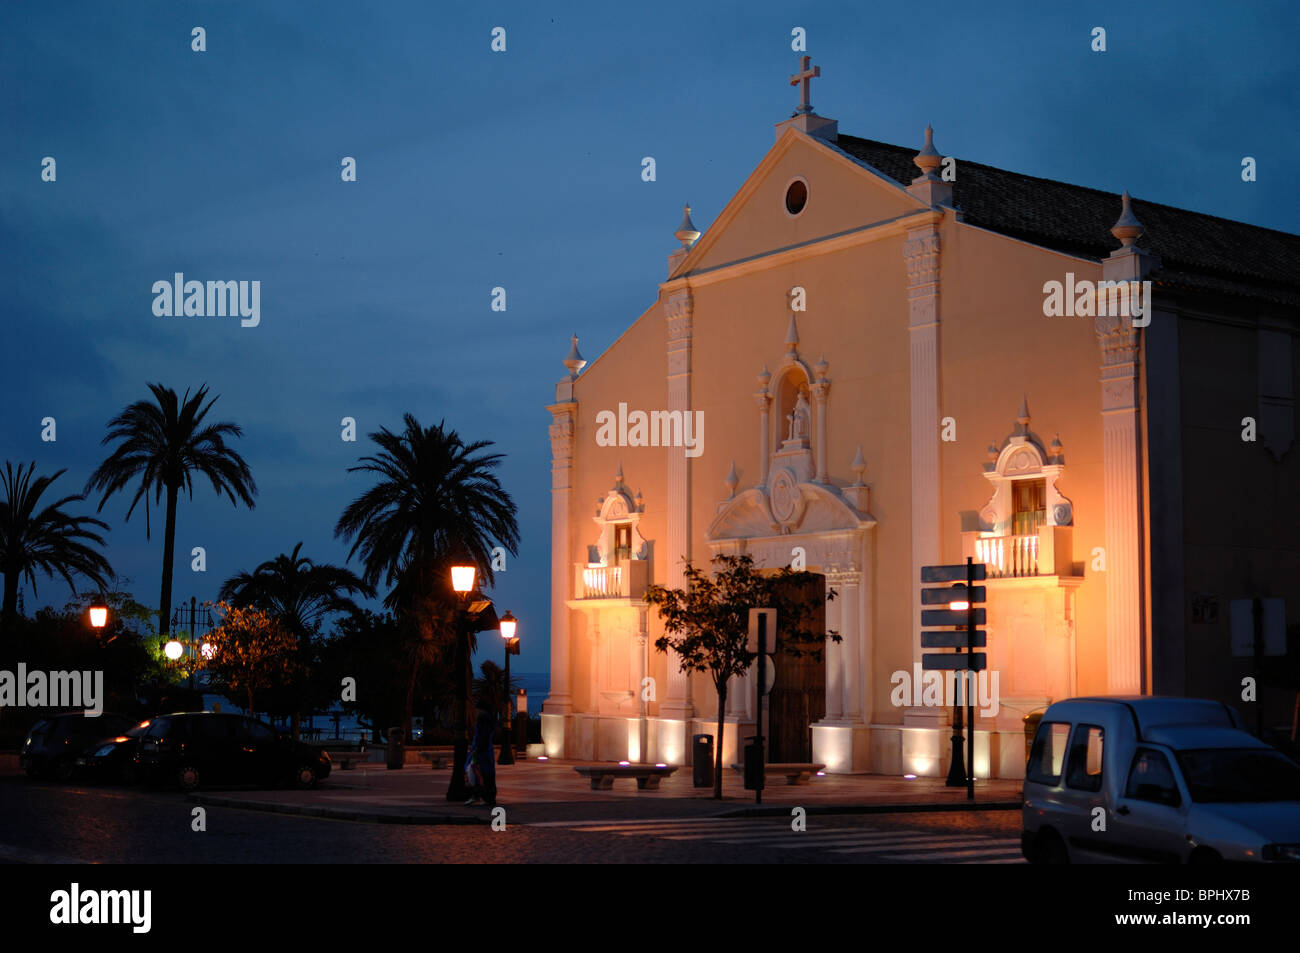 Church of Santa Maria in Africa, or Shrine of Our Lady in Africa, c18th Andalucian-style church, at Dusk or Lit at Night, Ceuta, Spain Stock Photo